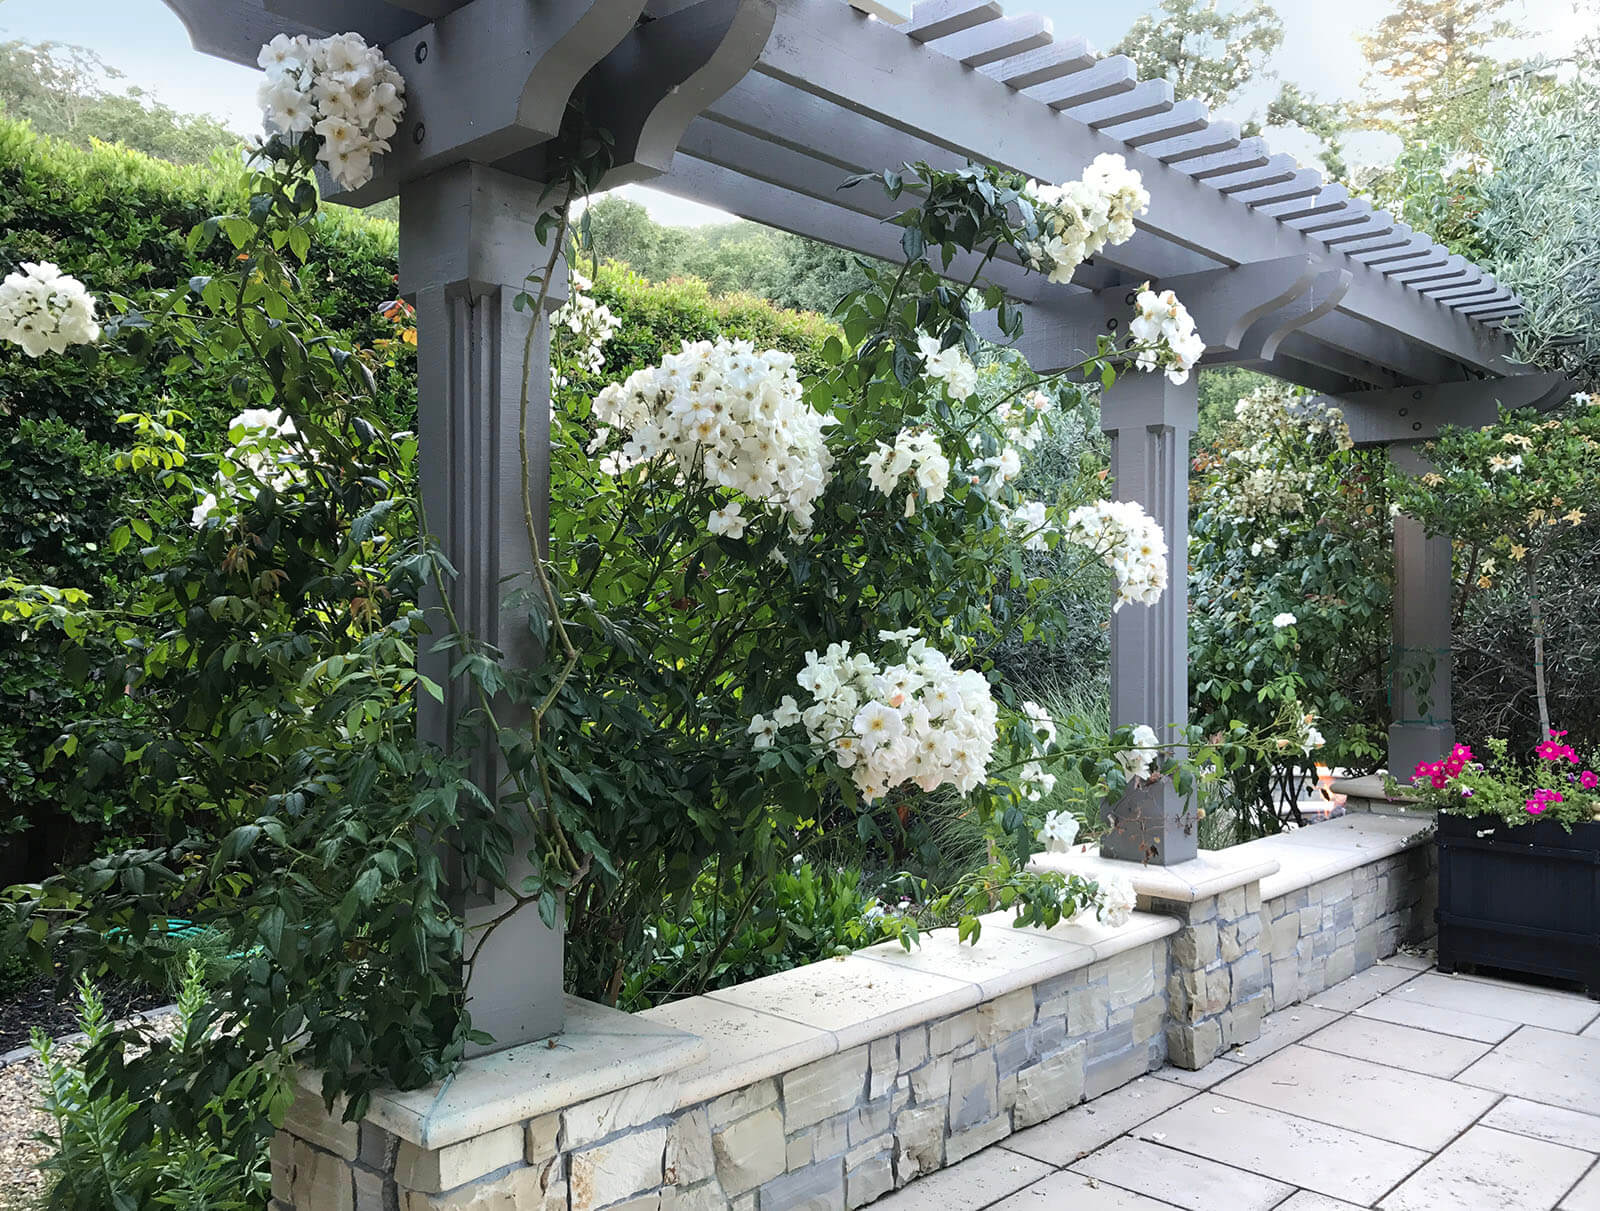 Very happy white flower climbing bush accenting the stone gray shade fixture with white stone seating and stone base on tiled patio